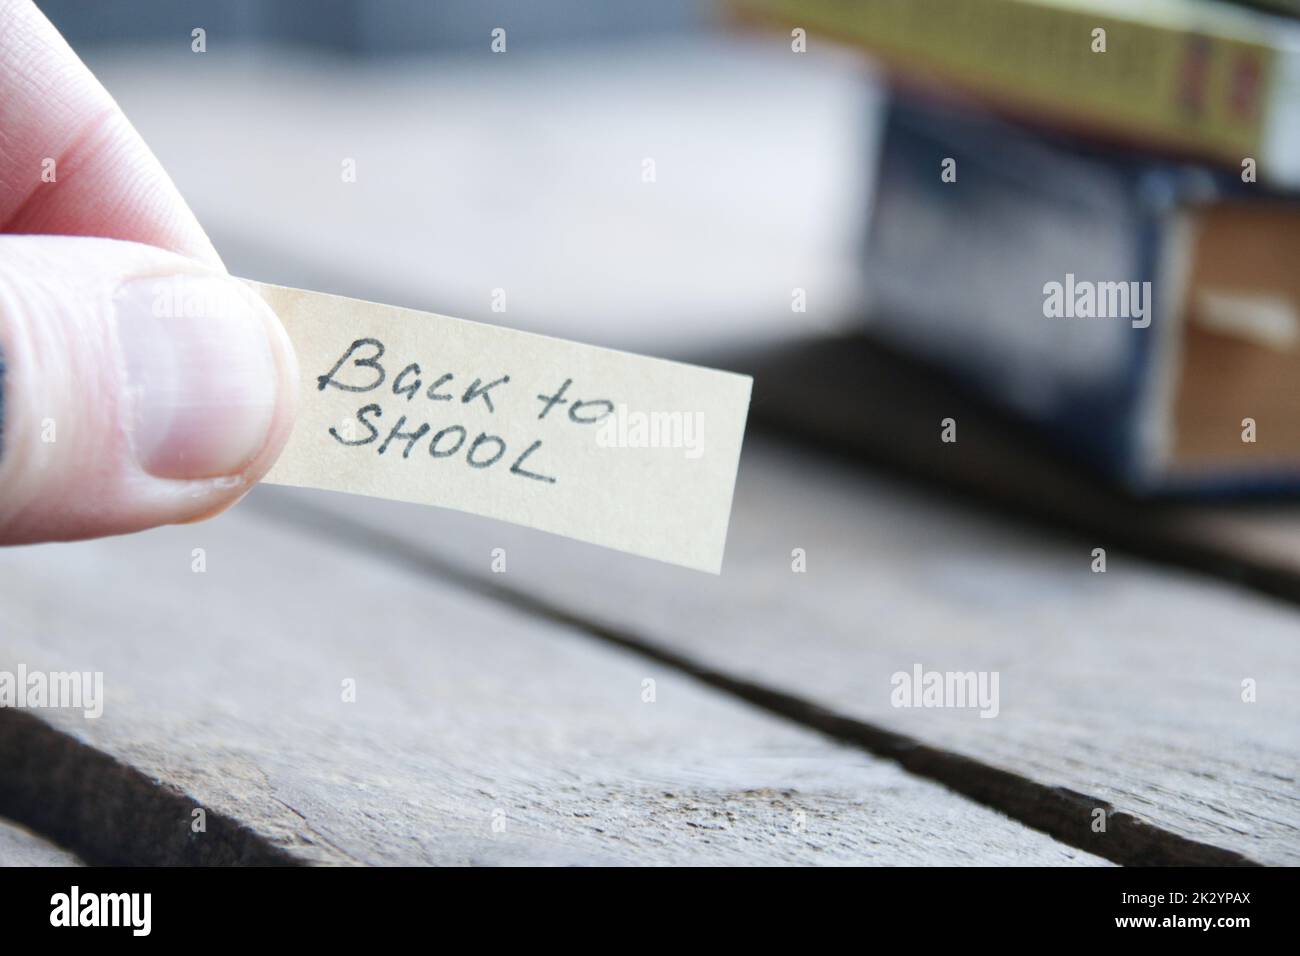 Back to school, creative concept on the table. Stock Photo